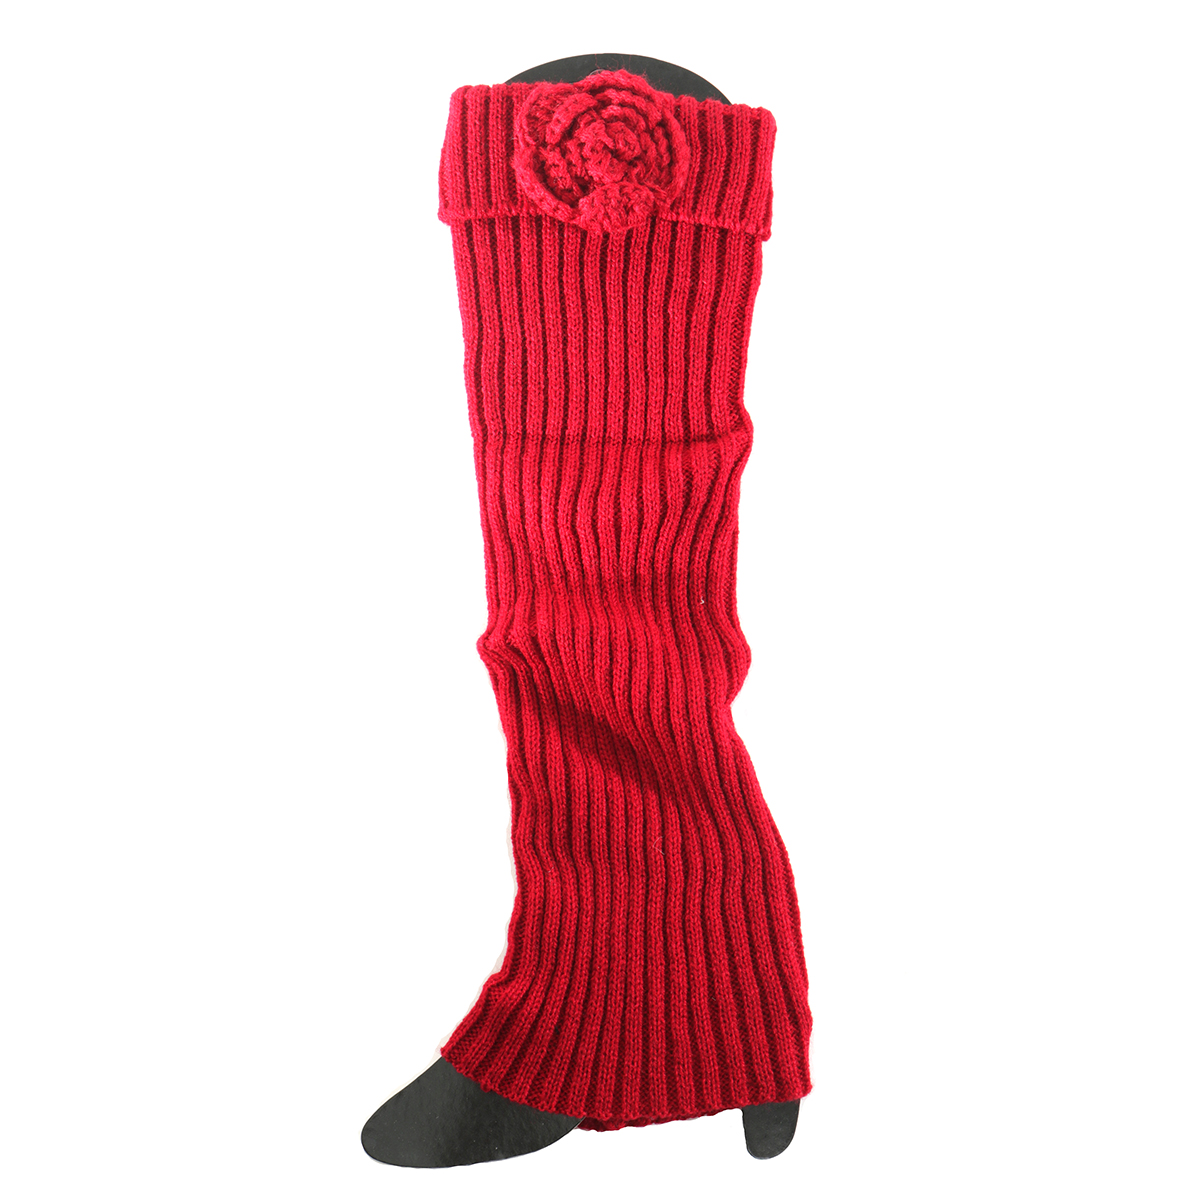 Burgundy Boot Cuff with Flower Tall 50sp